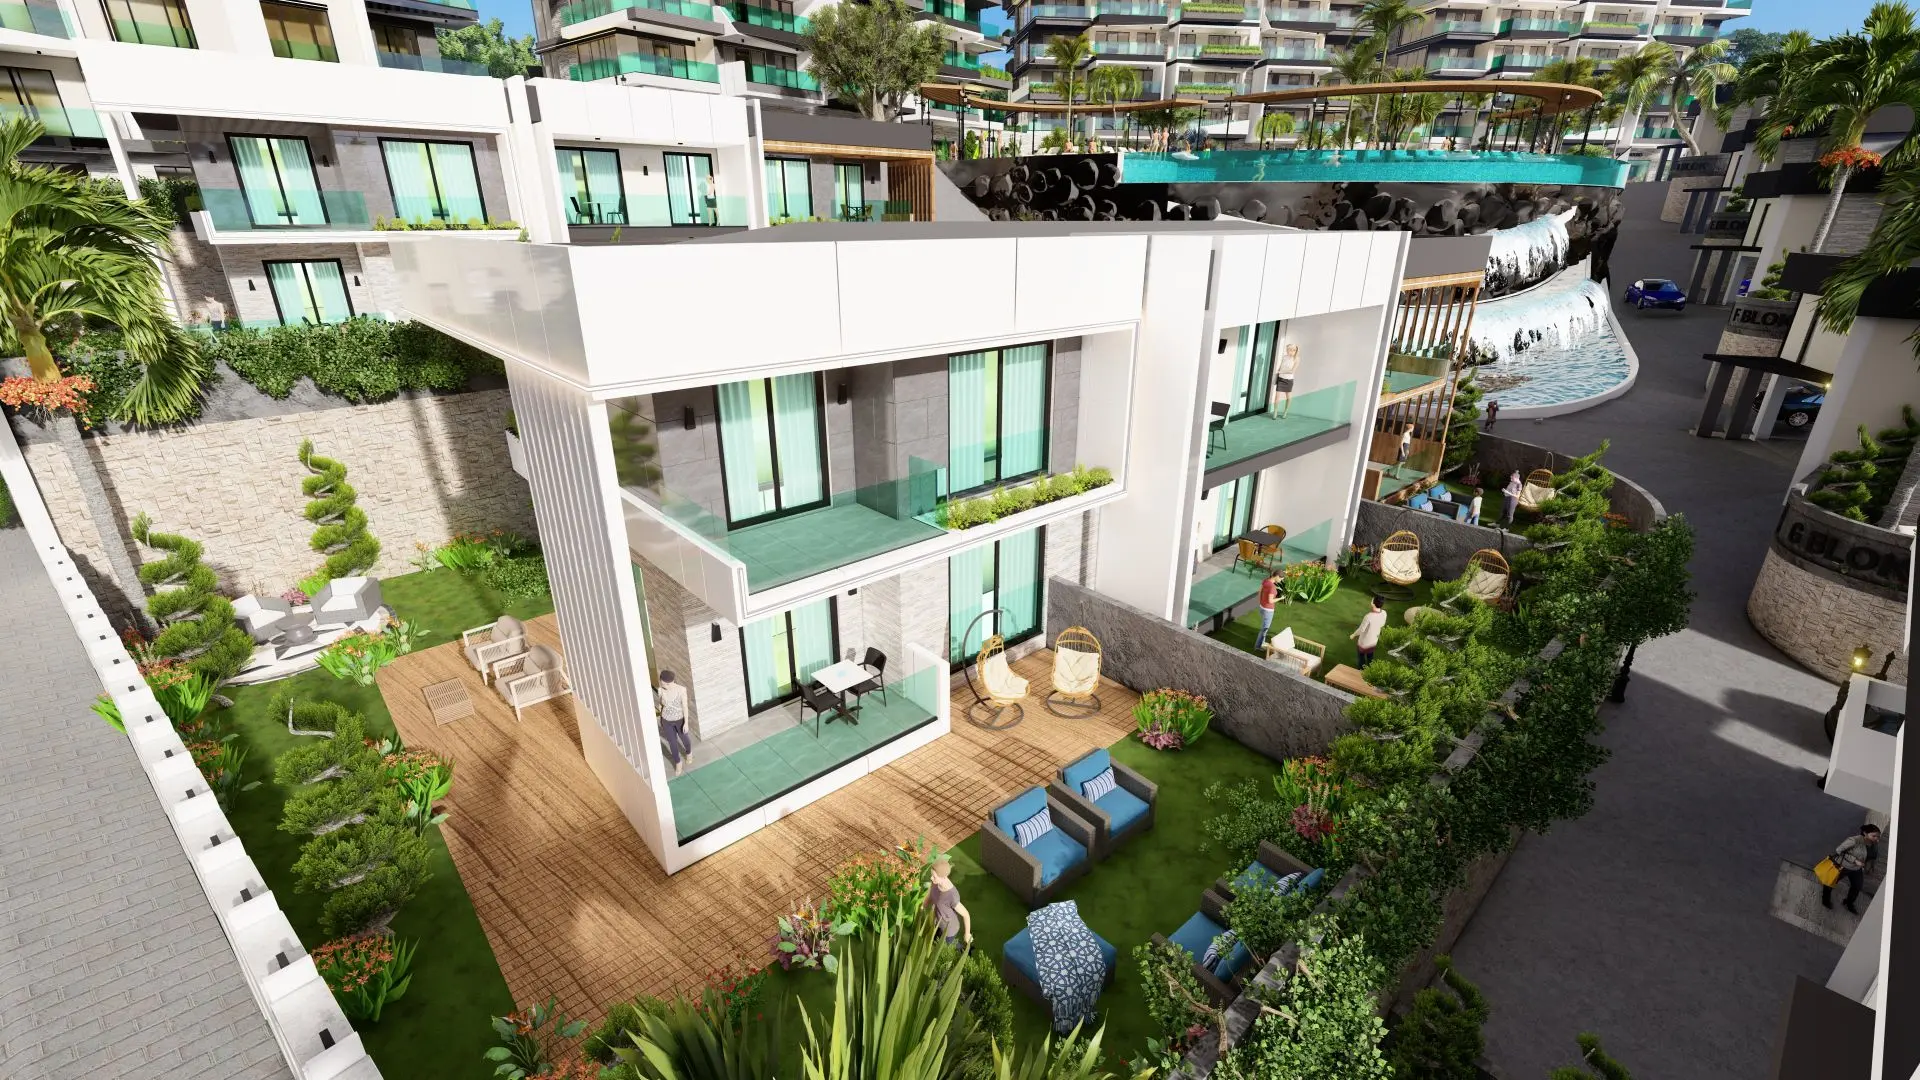 NEW LUXURIOUS PROJECT AREA IN KARGICAK, ALANYA